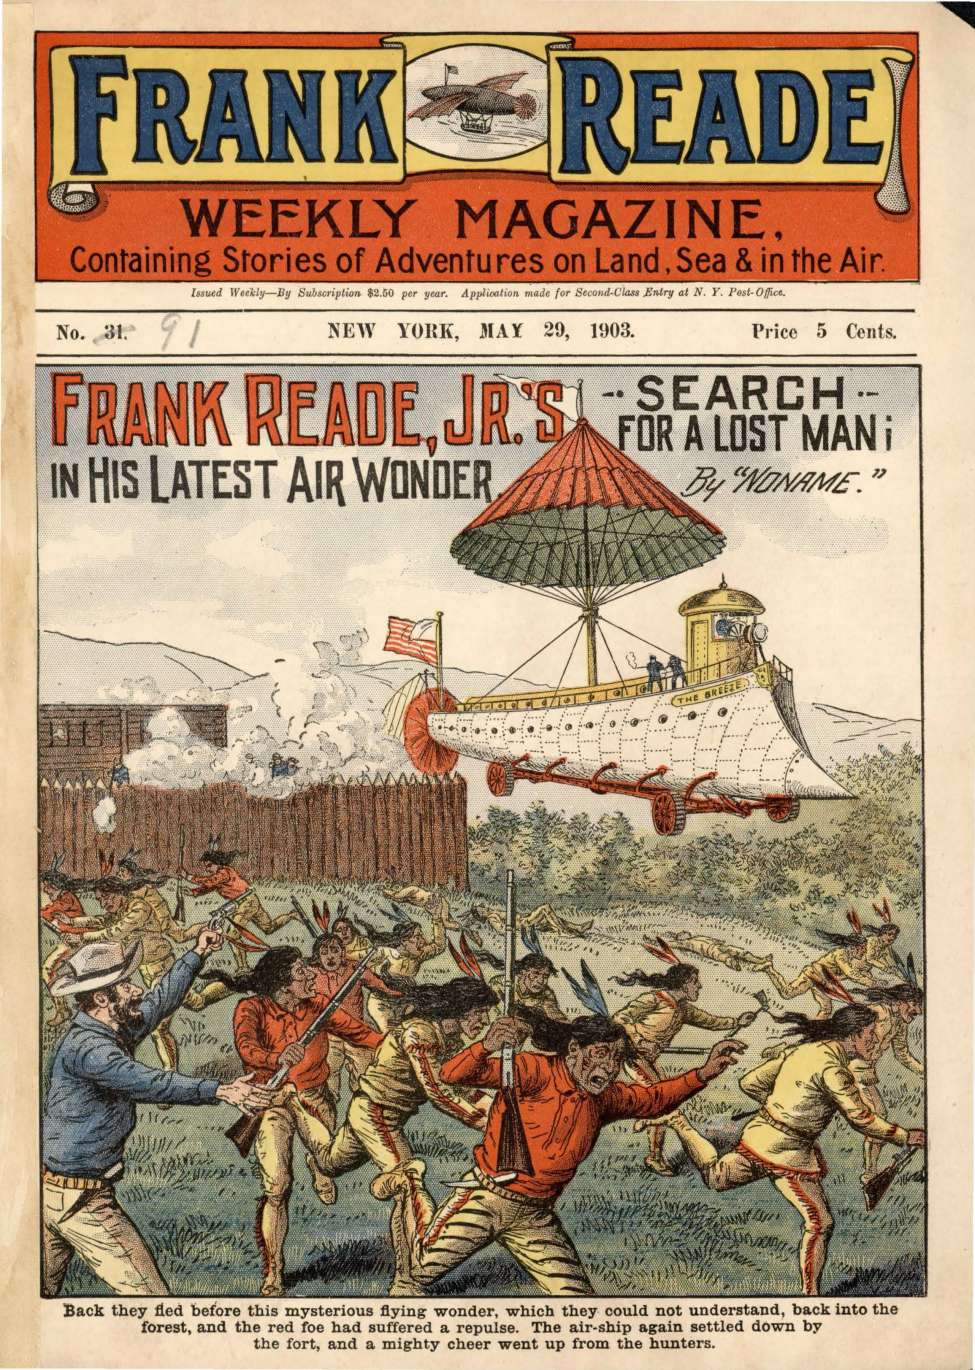 Book Cover For v1 31 - Frank Reade, Jr.'s Search for a Lost Man